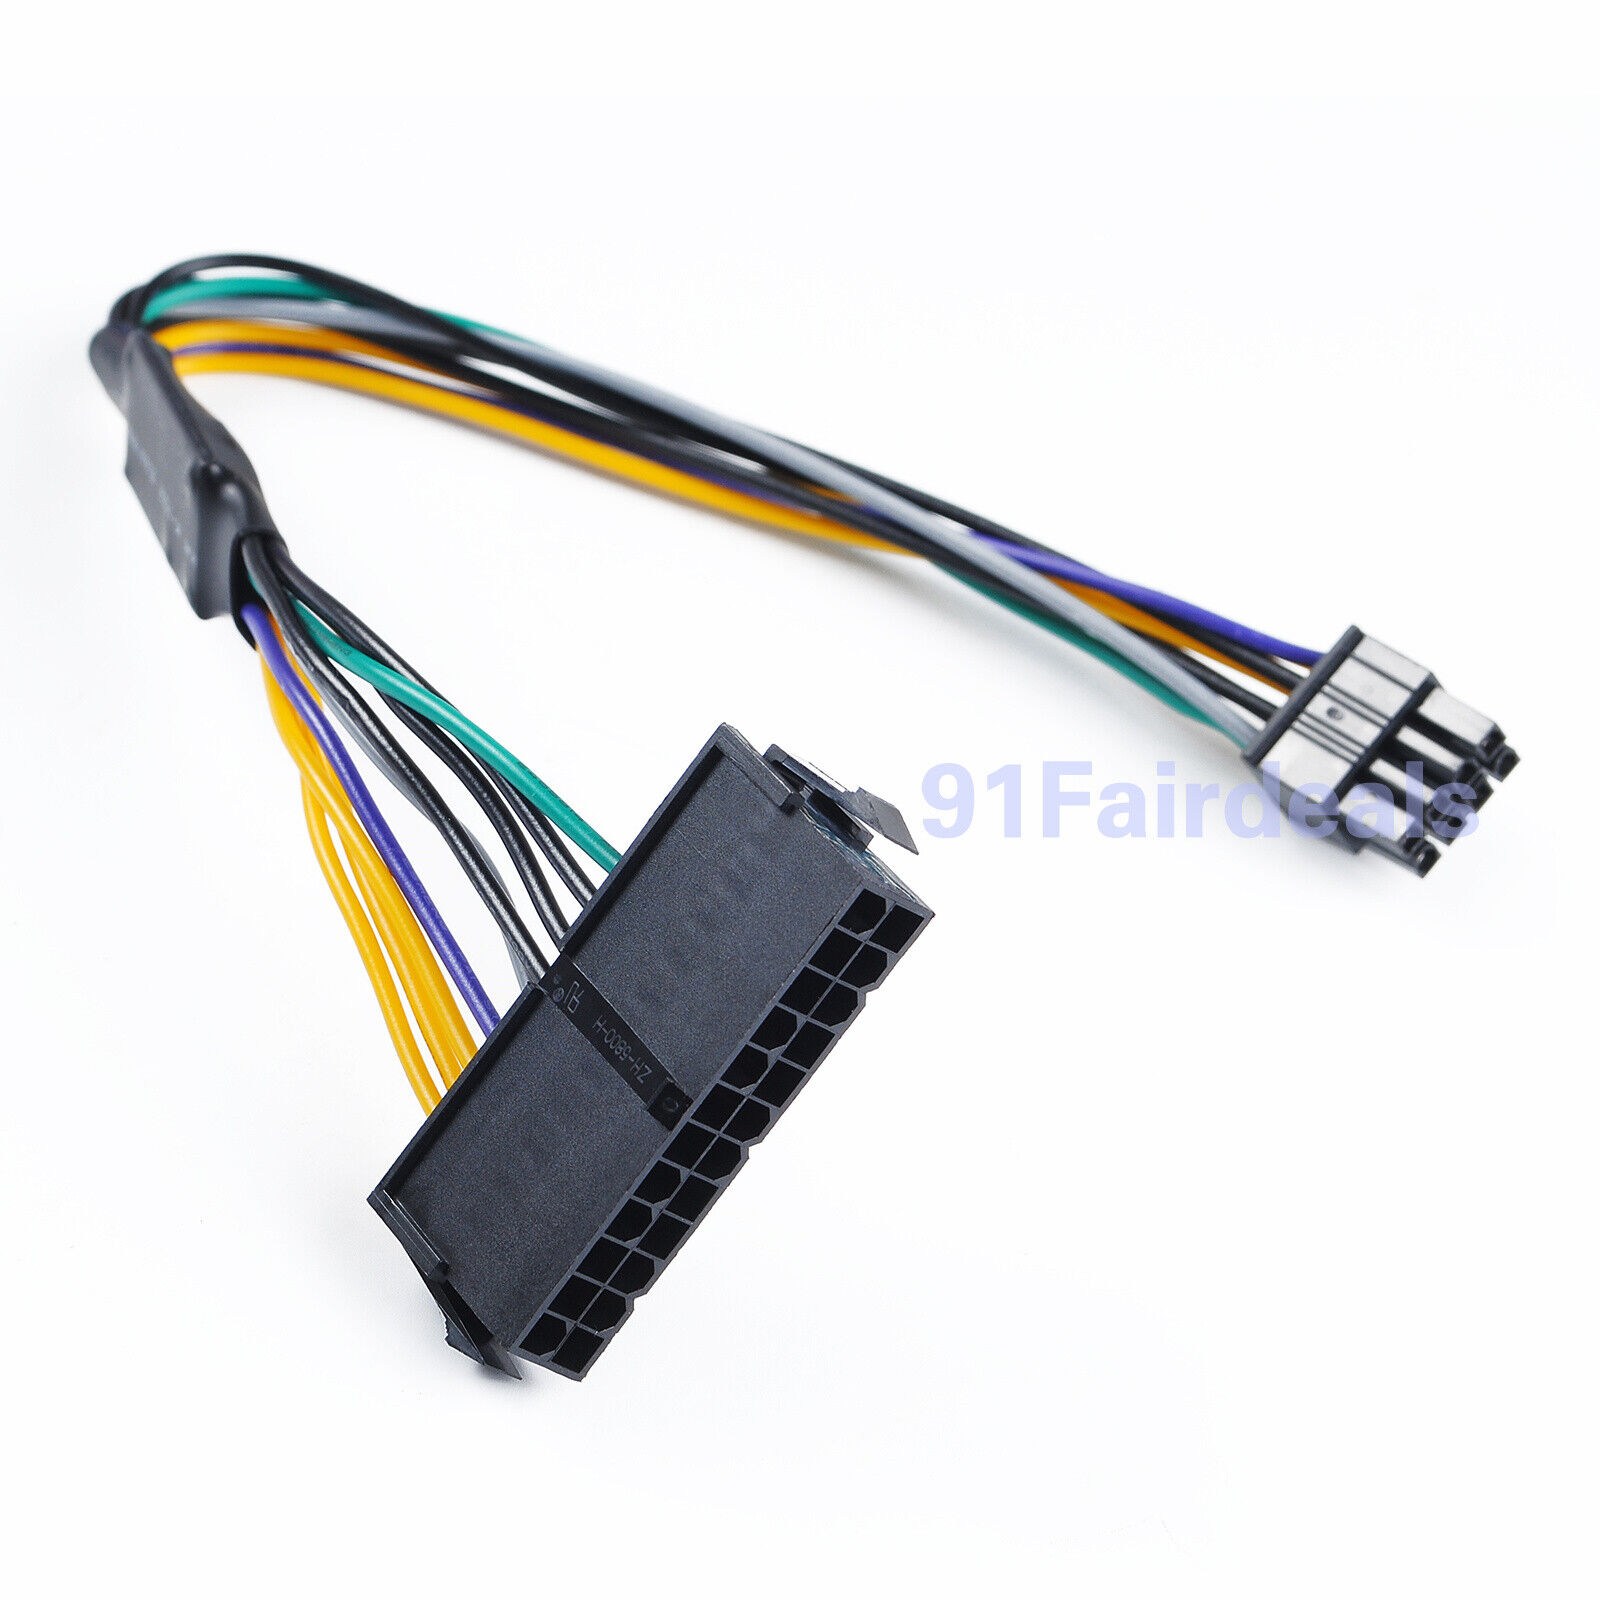 2PCS 24Pin to 8Pin ATX Power Supply Cable for Dell Optiplex 3020 7020 9020 T1700